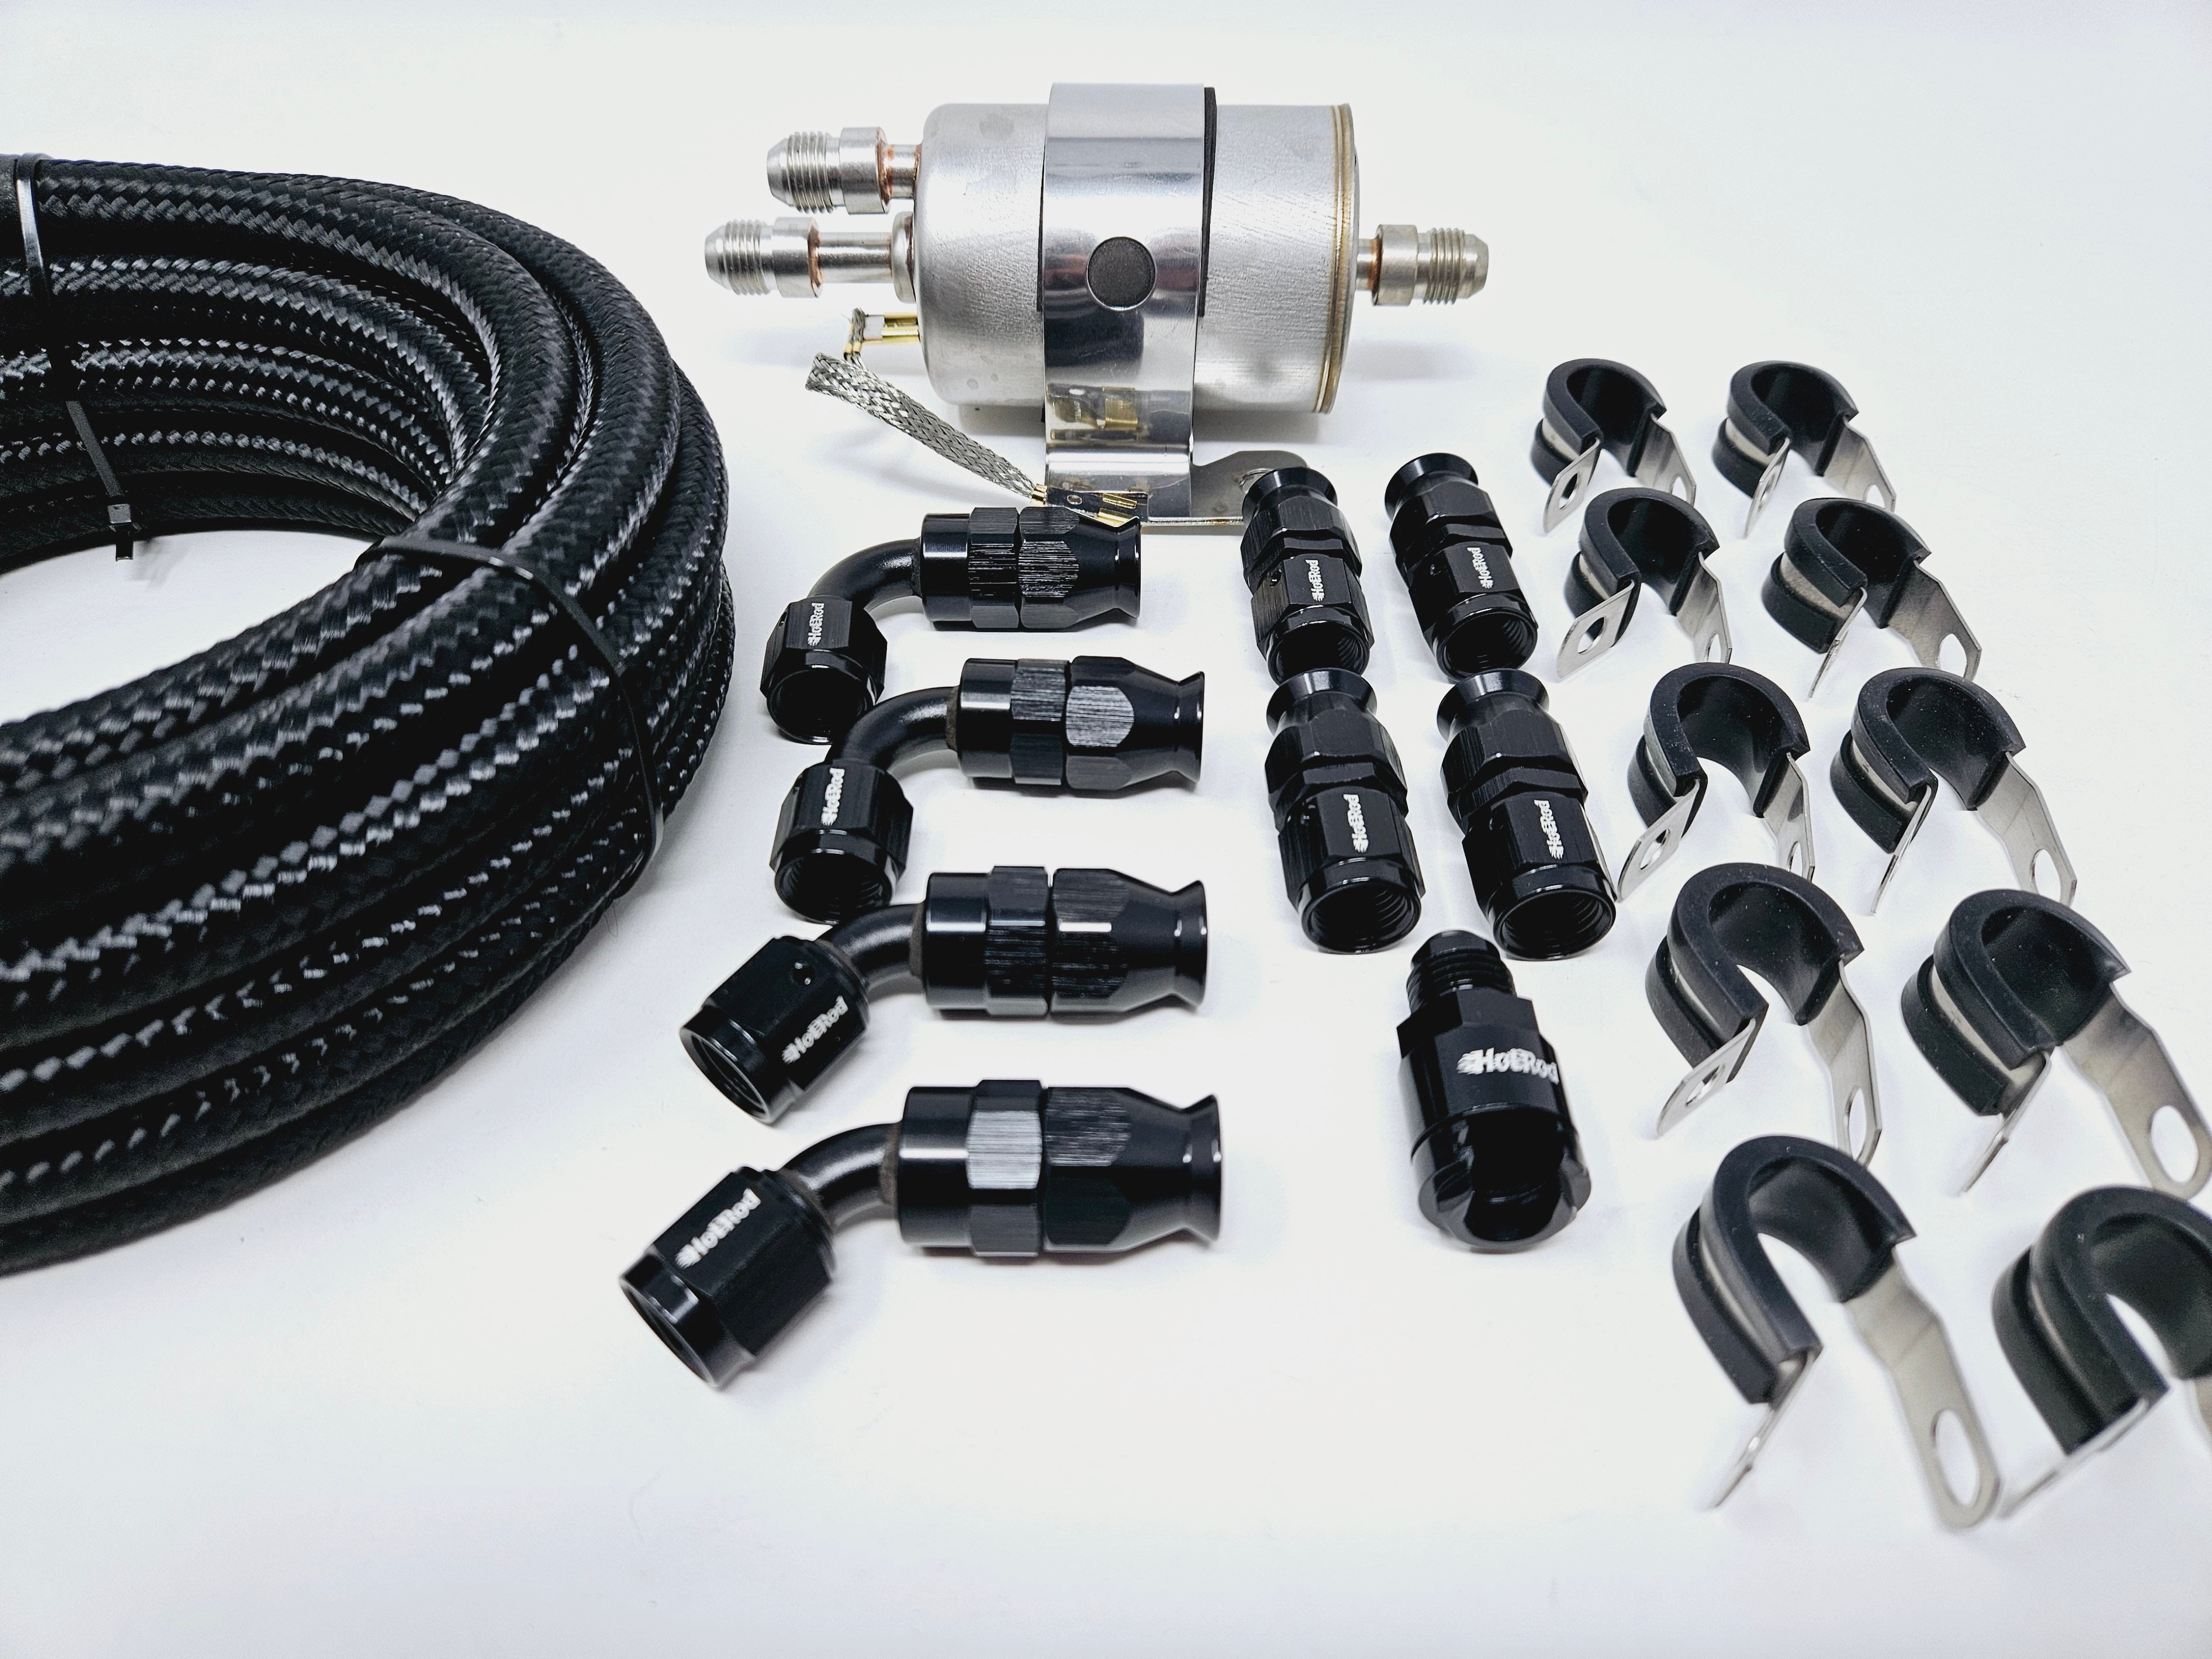 Fuel system swap kits for LS engines